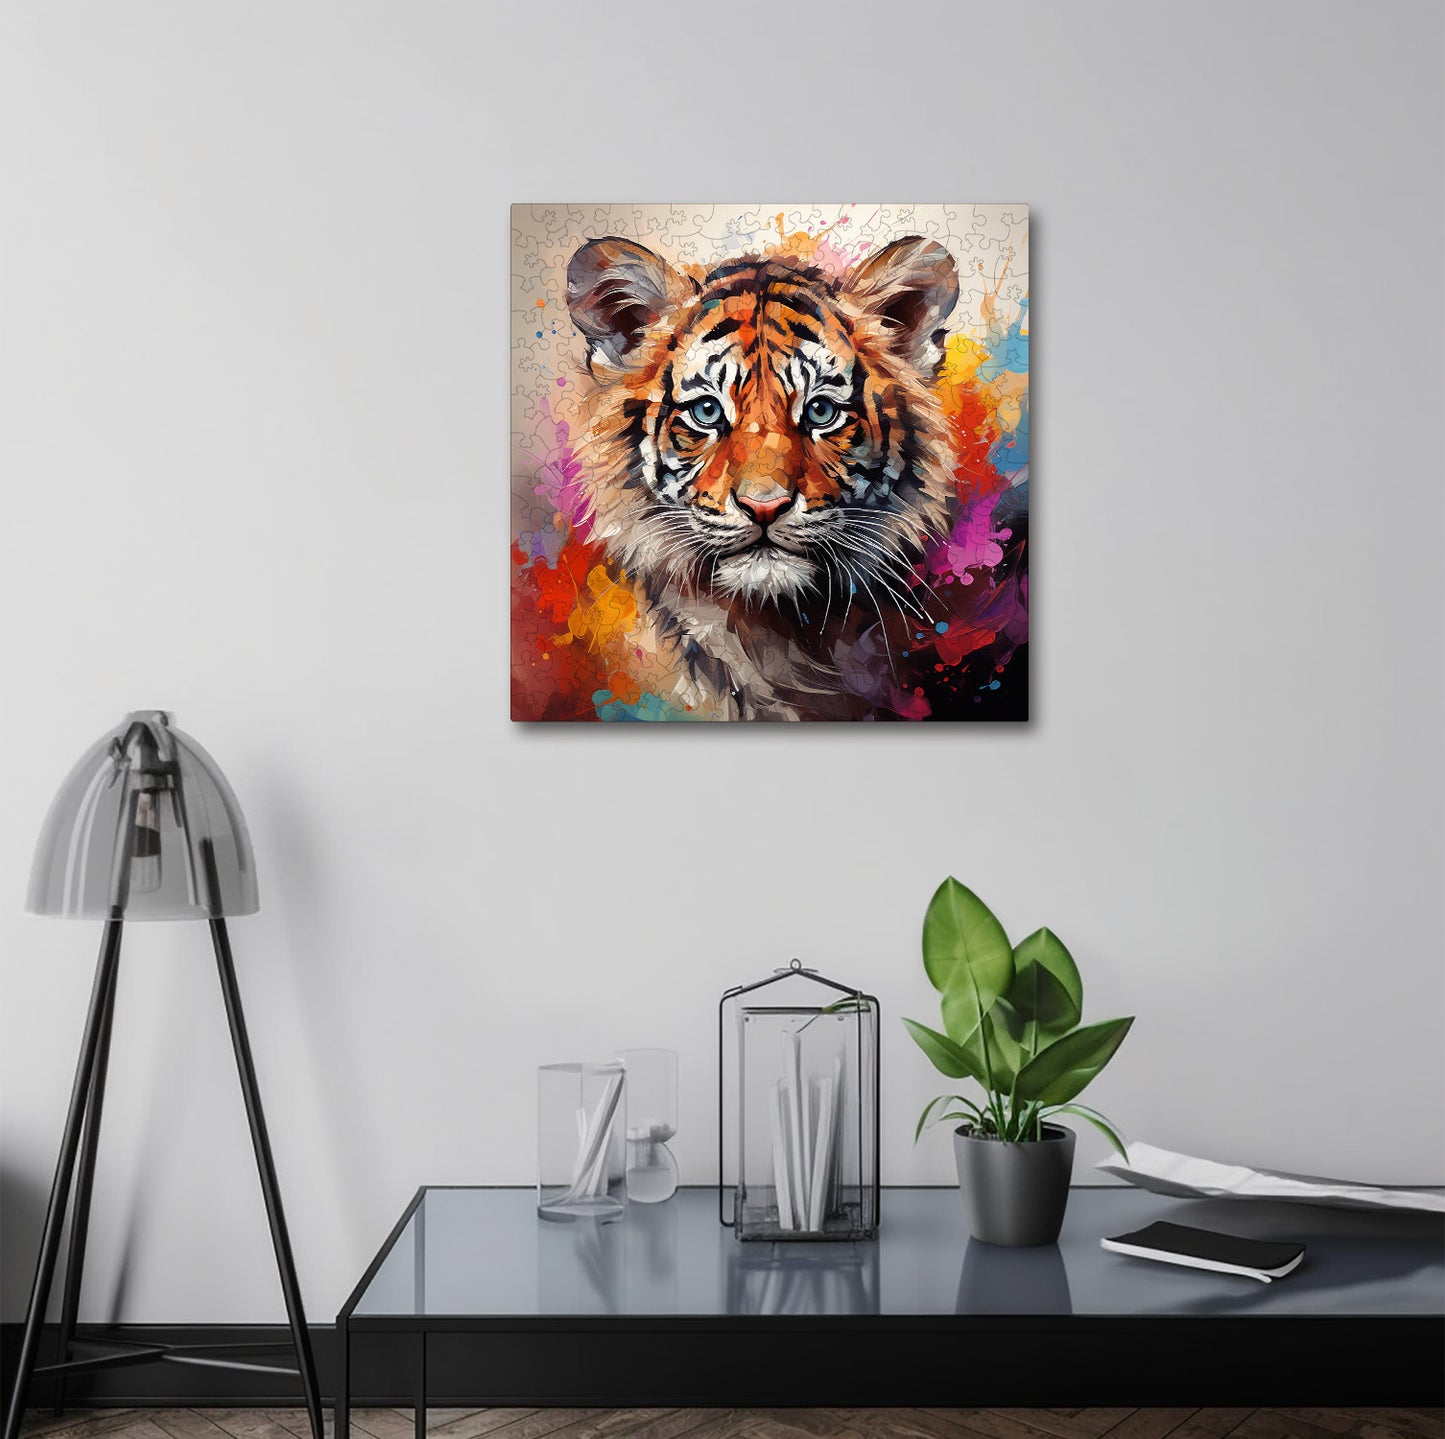 Puzzle cu Animale - Baby Tiger 1 - 200 piese - 30 x 30 cm